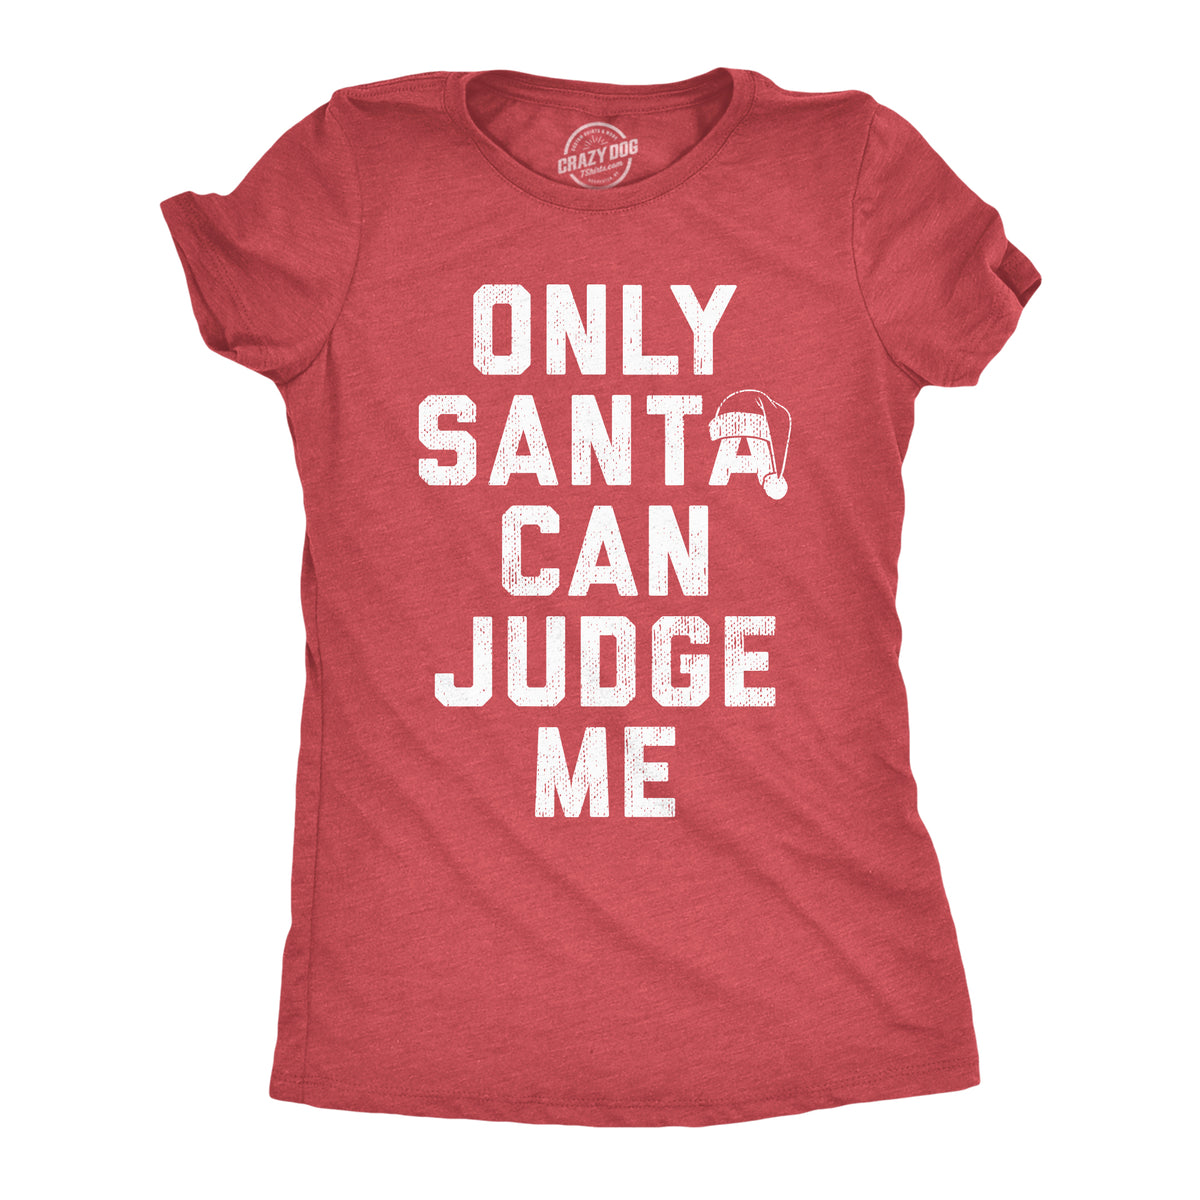 Funny Heather Red - Santa Judge Only Santa Can Judge Me Womens T Shirt Nerdy Christmas Sarcastic Tee